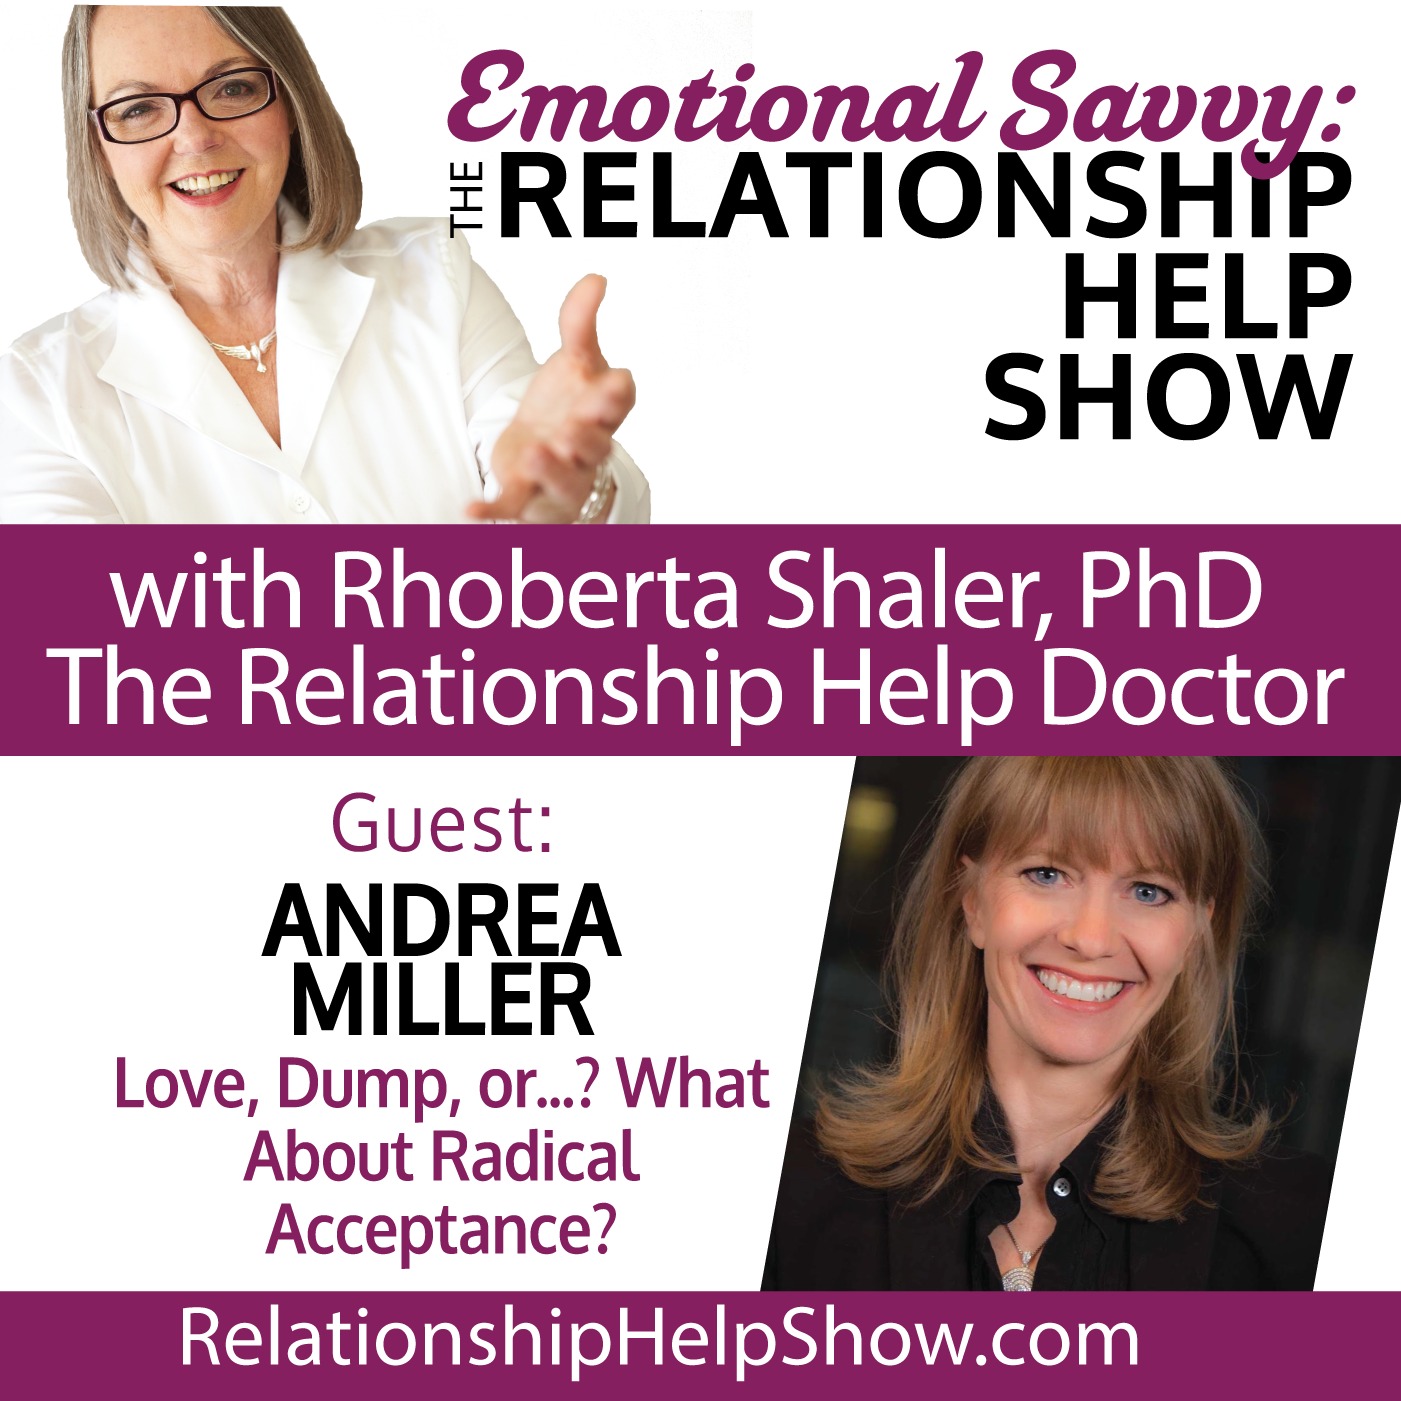 Love, Dump, Or...? What About Radical Acceptance? GUEST: Andrea Miller